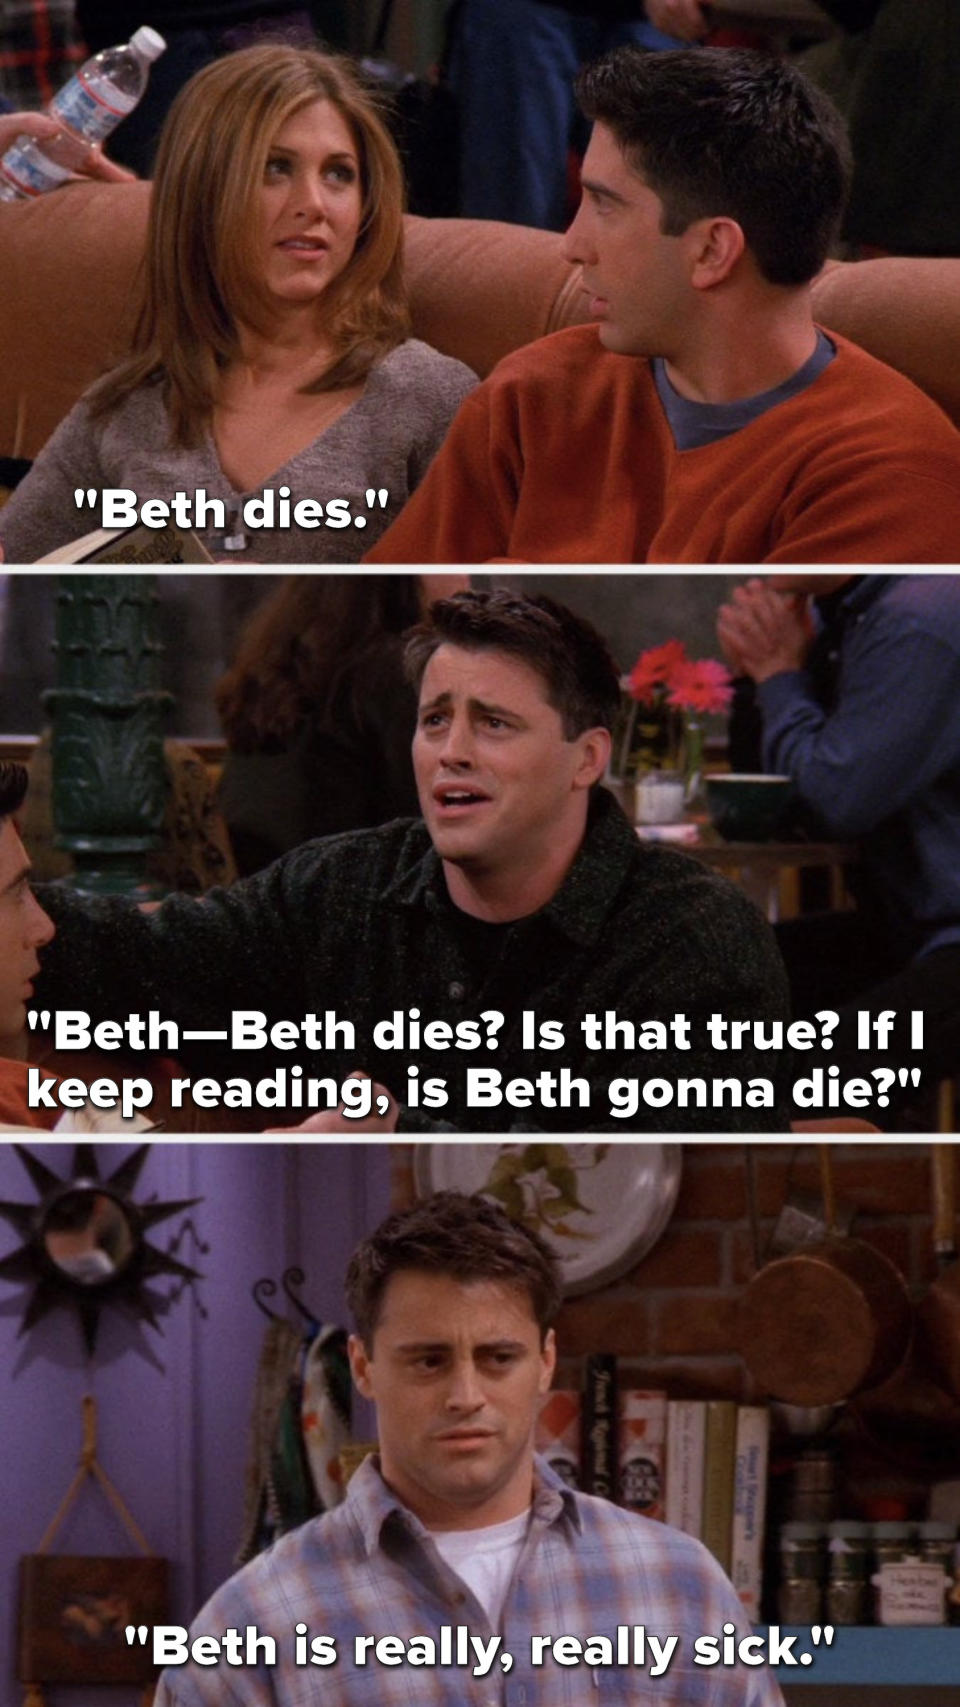 On Friends, Rachel says, Beth dies, Joey says, Beth dies, is that true, if I keep reading, is Beth gonna die, and then later Joey says, Beth is really, really sick